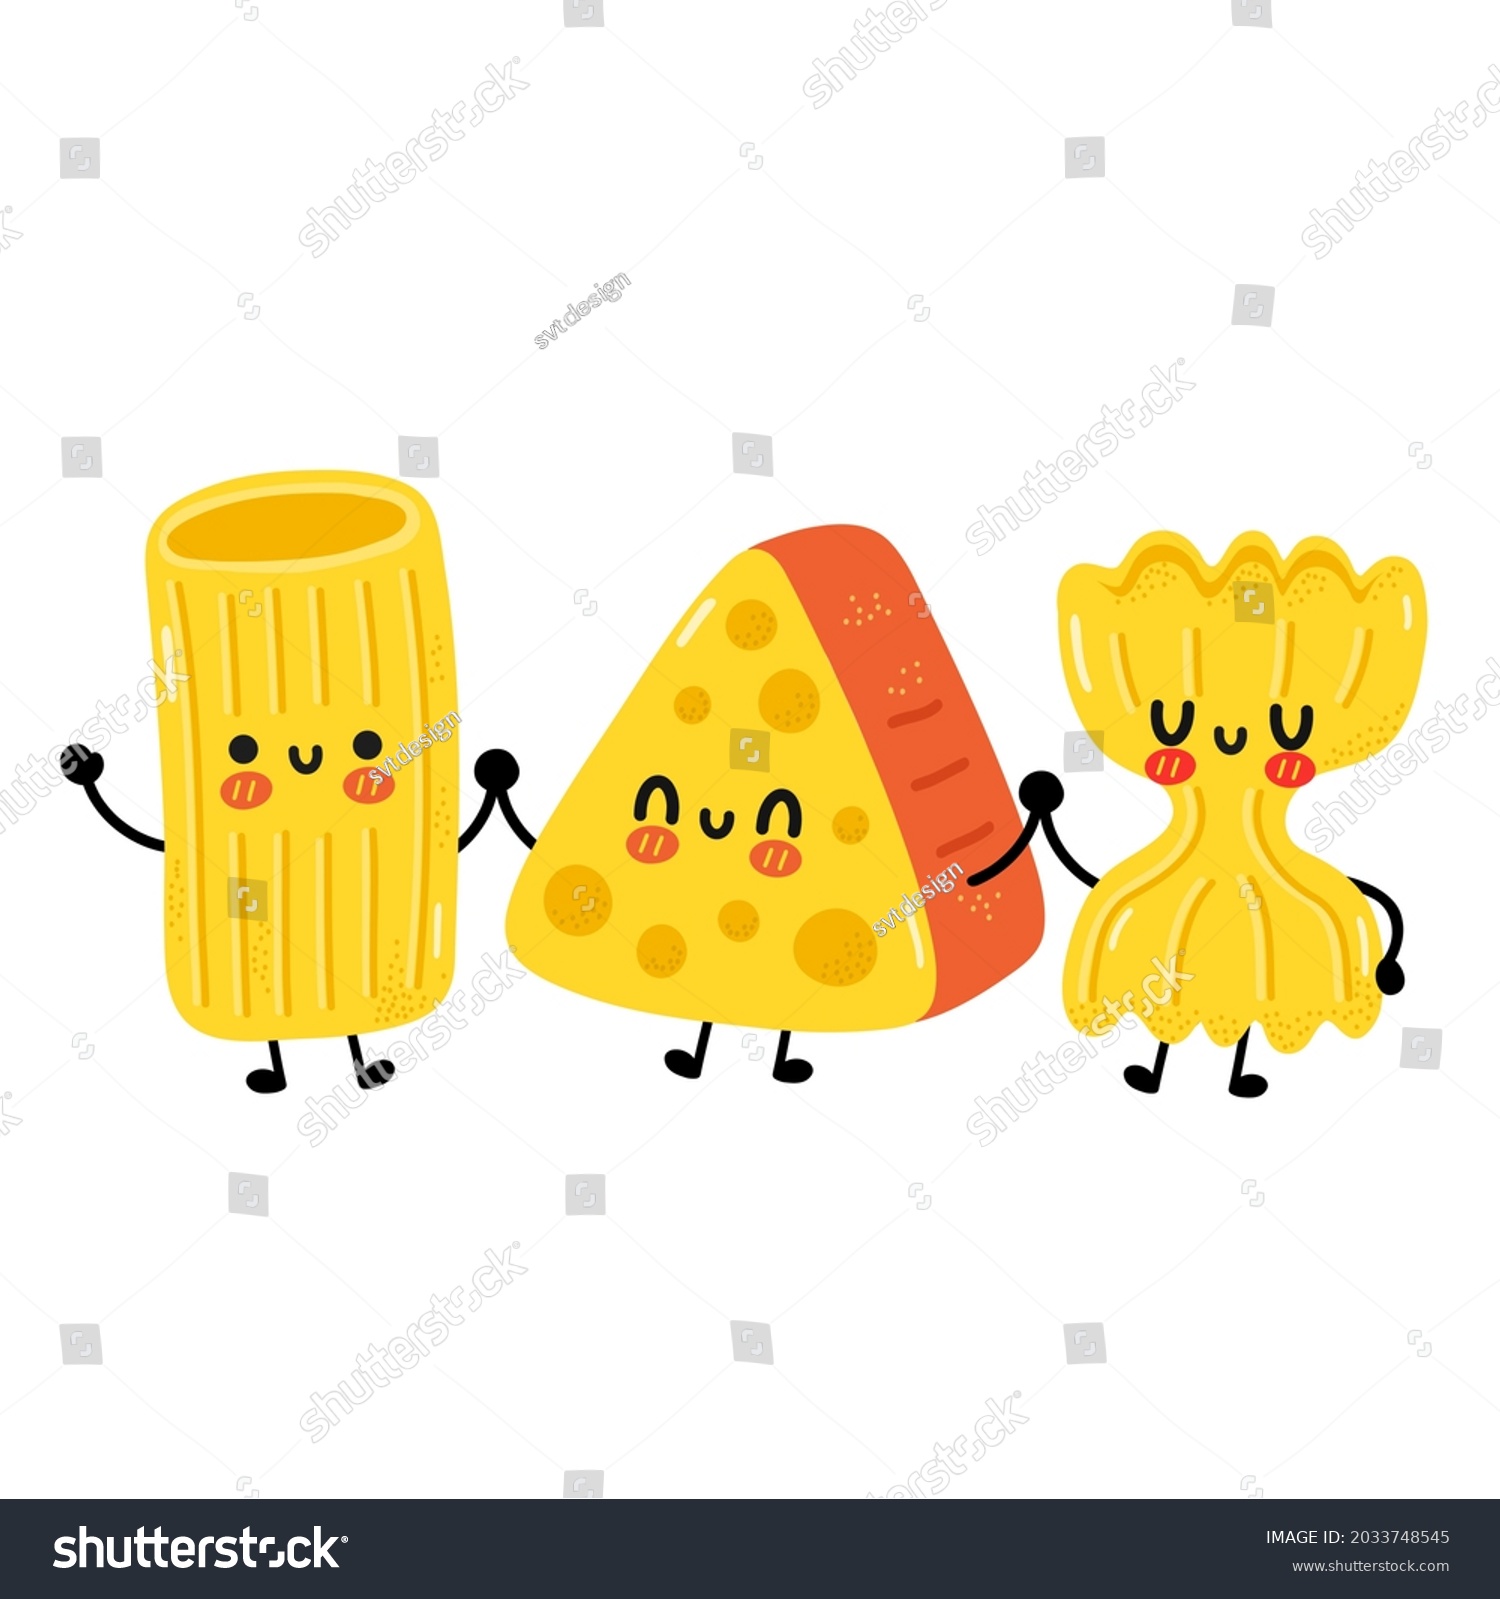 SVG of Cute funny macaroni pasta noodles character. Vector cartoon kawaii character illustration. Isolated on white background. Cute macaroni, cheese cartoon mascot concept svg